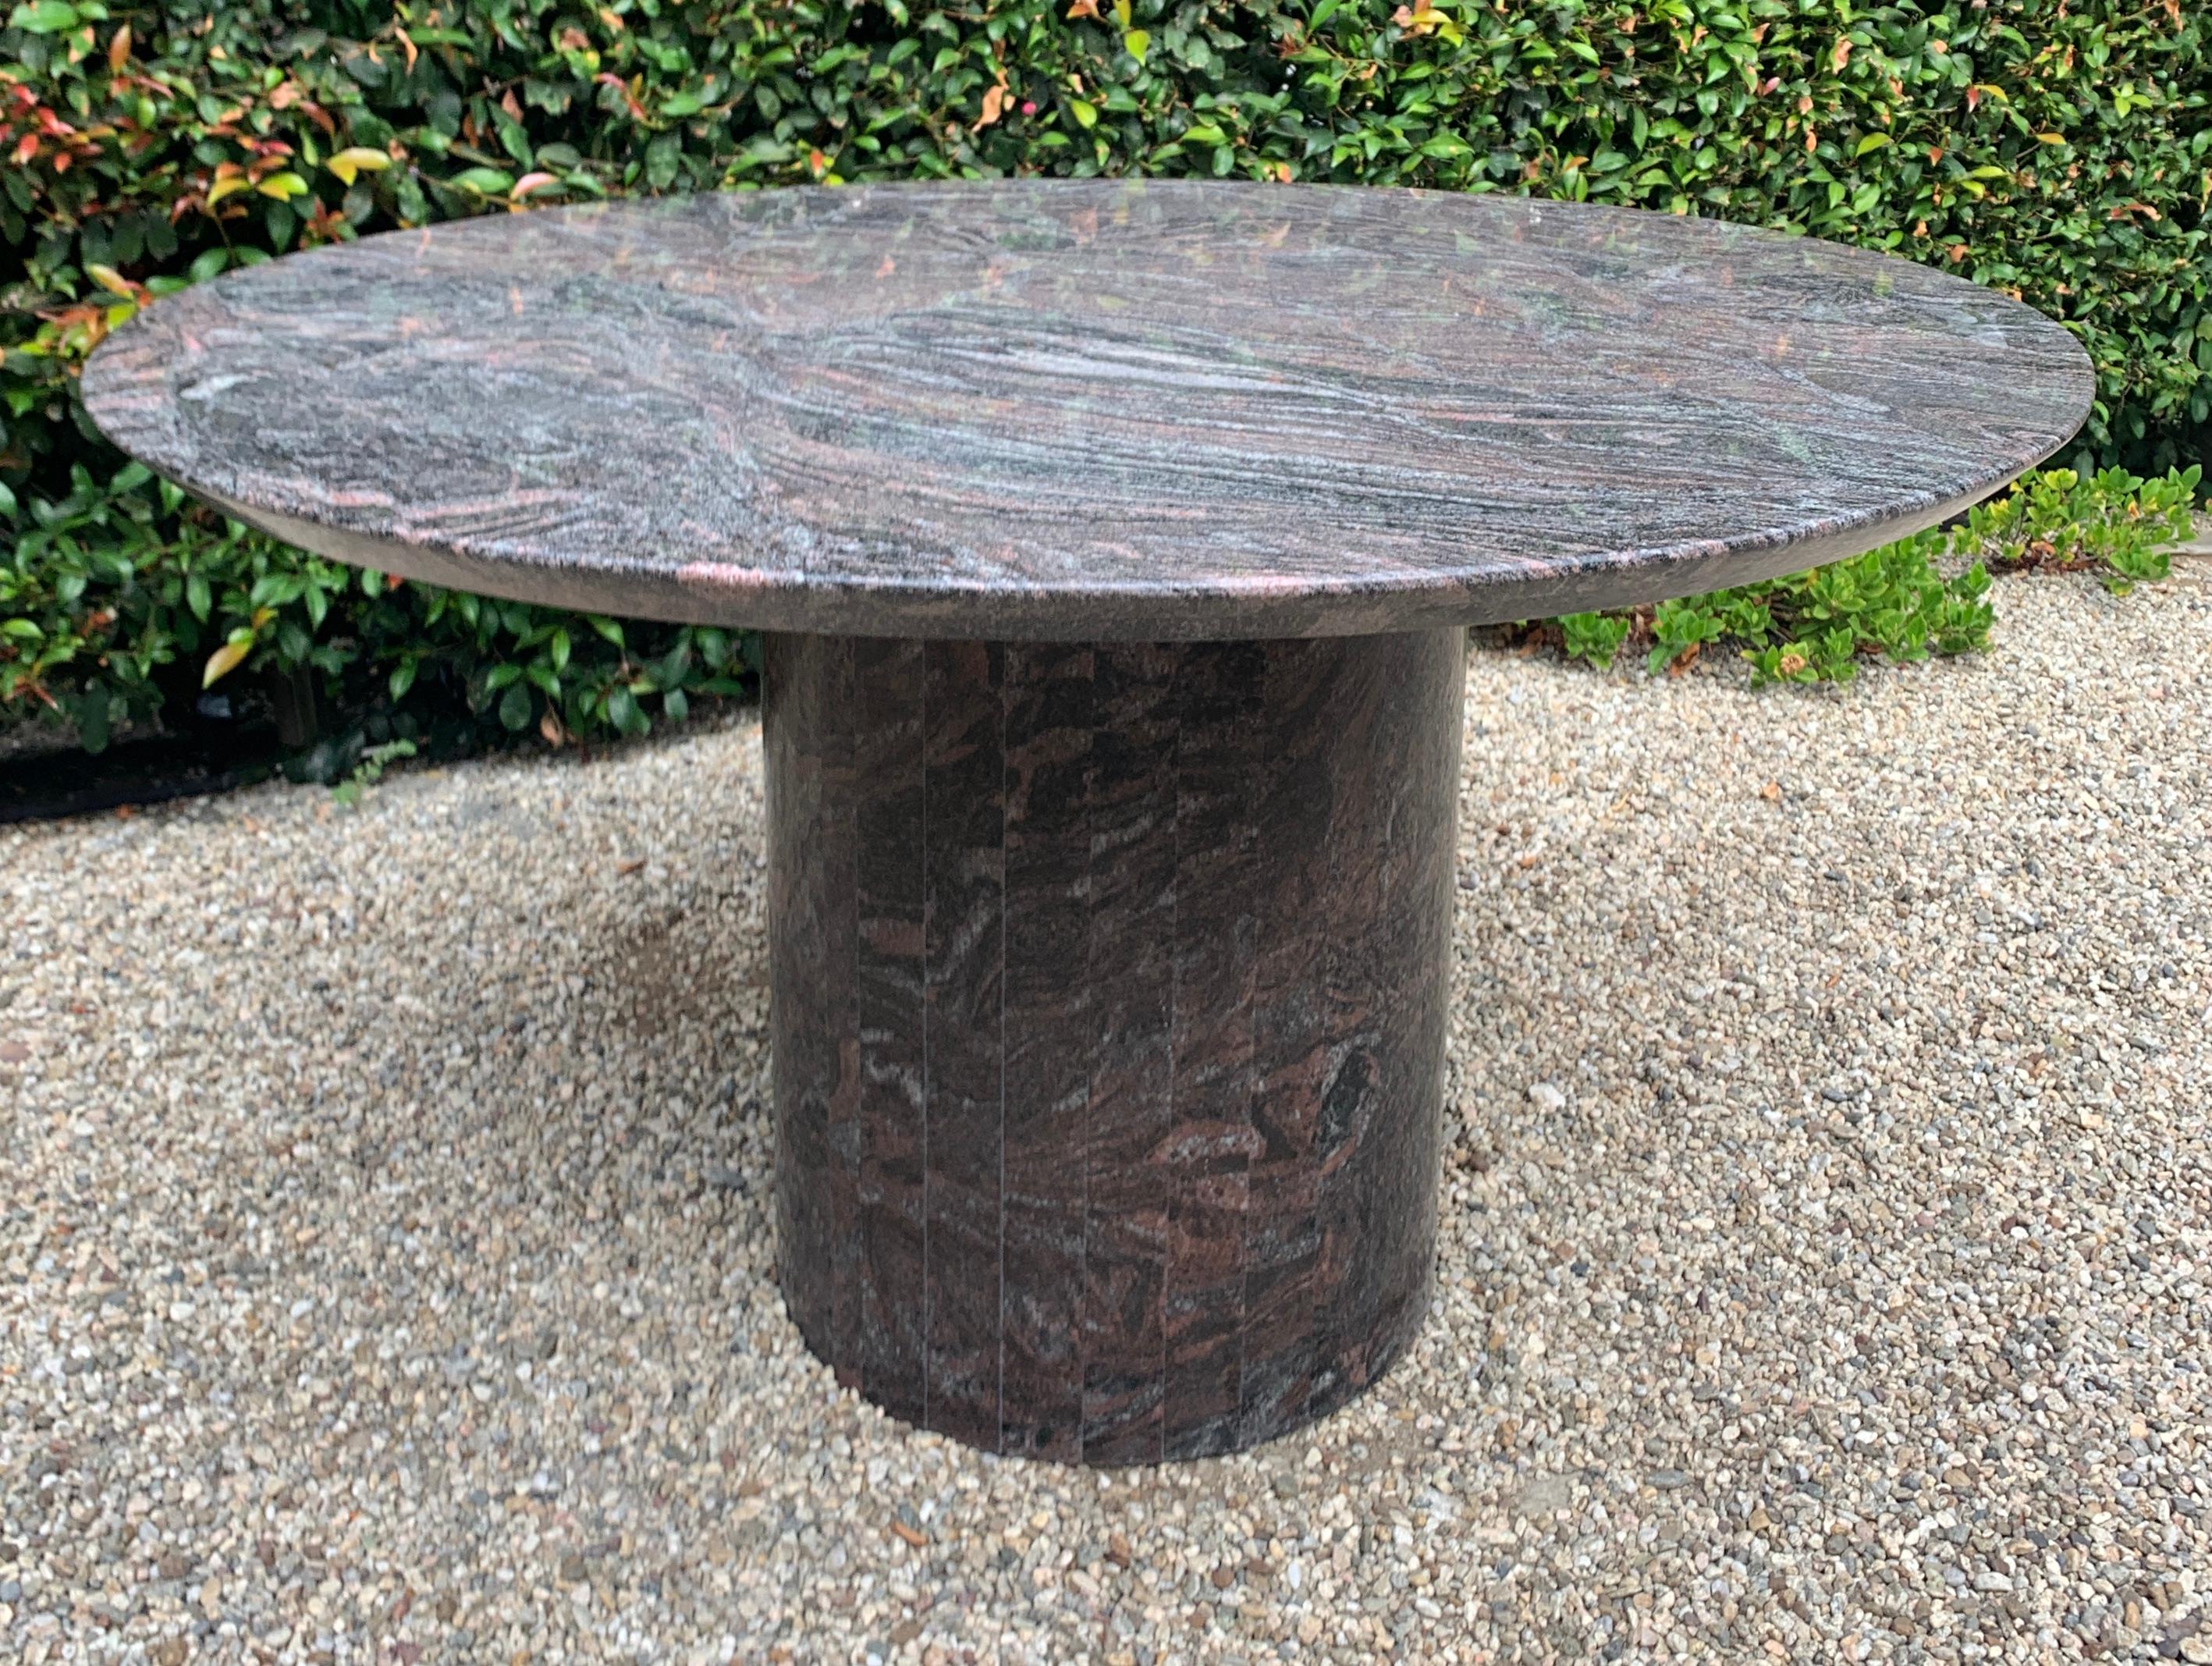 Custom granite dining table with 50 inch knife edge top and custom ribbed-cut cylinder base. This table can easily seat up to six guests comfortably.

The movement and pattern of the Granite top and base makes for a bold statement in any room, for